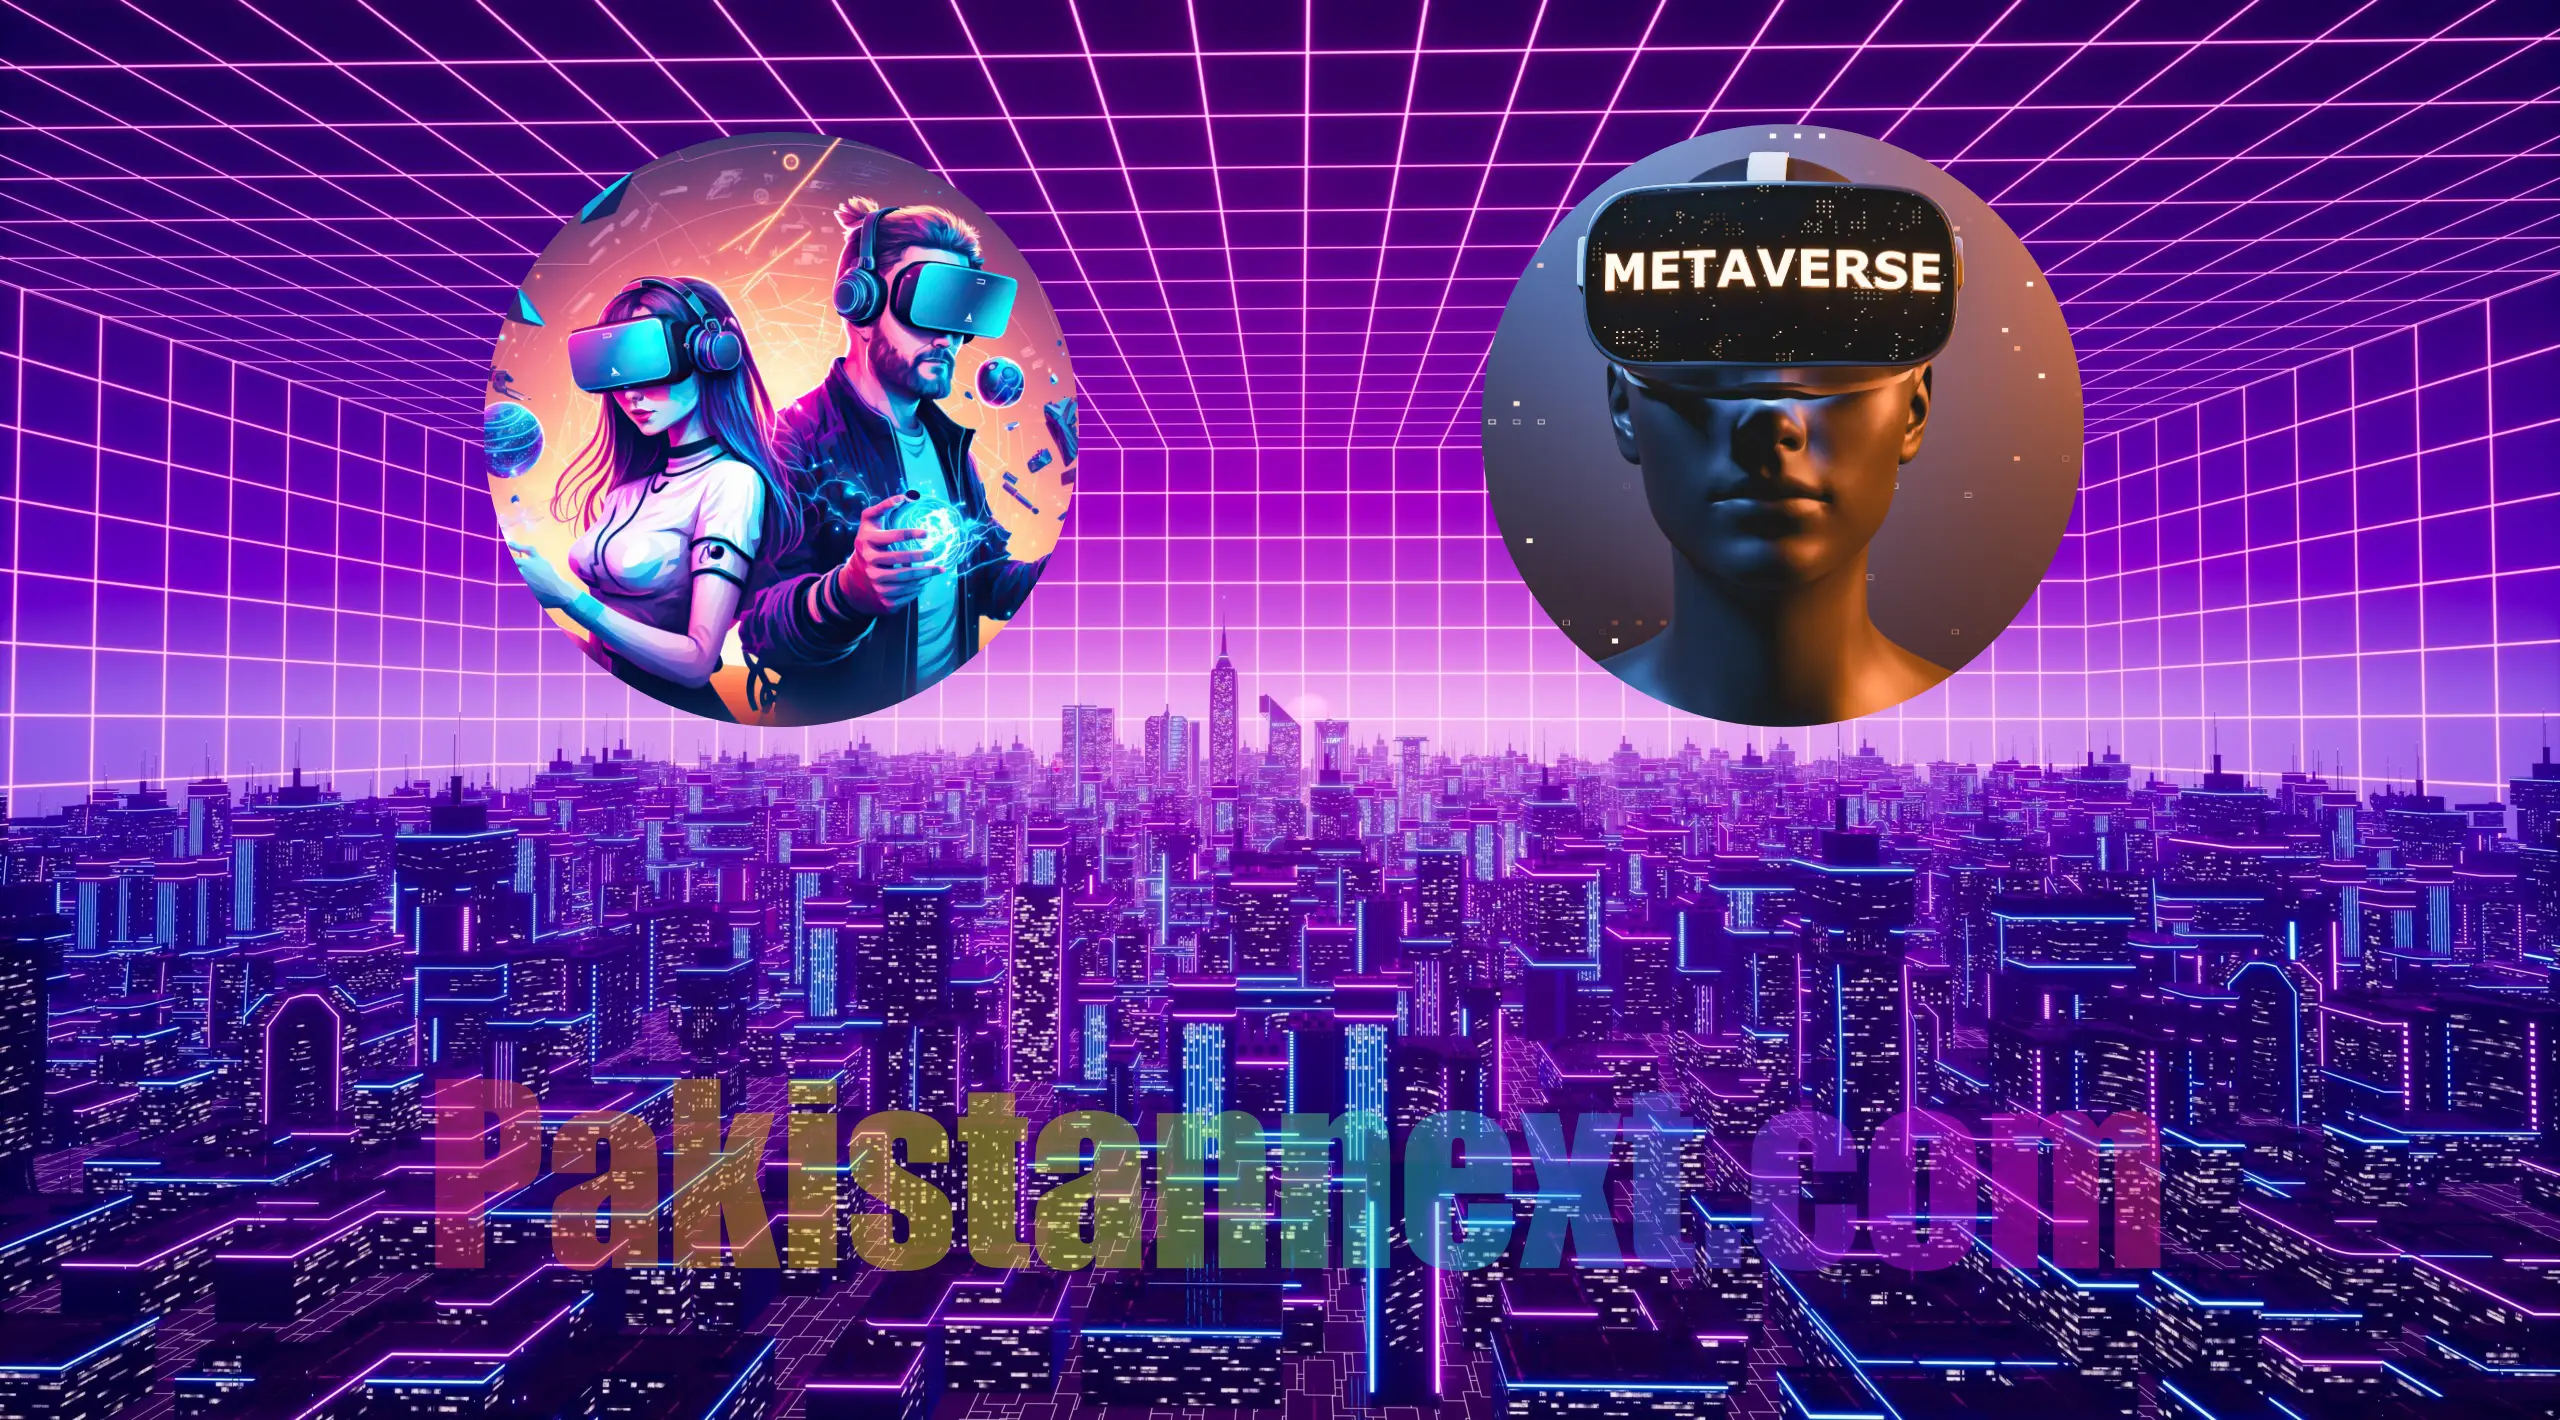 How to Purchase Virtual Land in the Metaverse